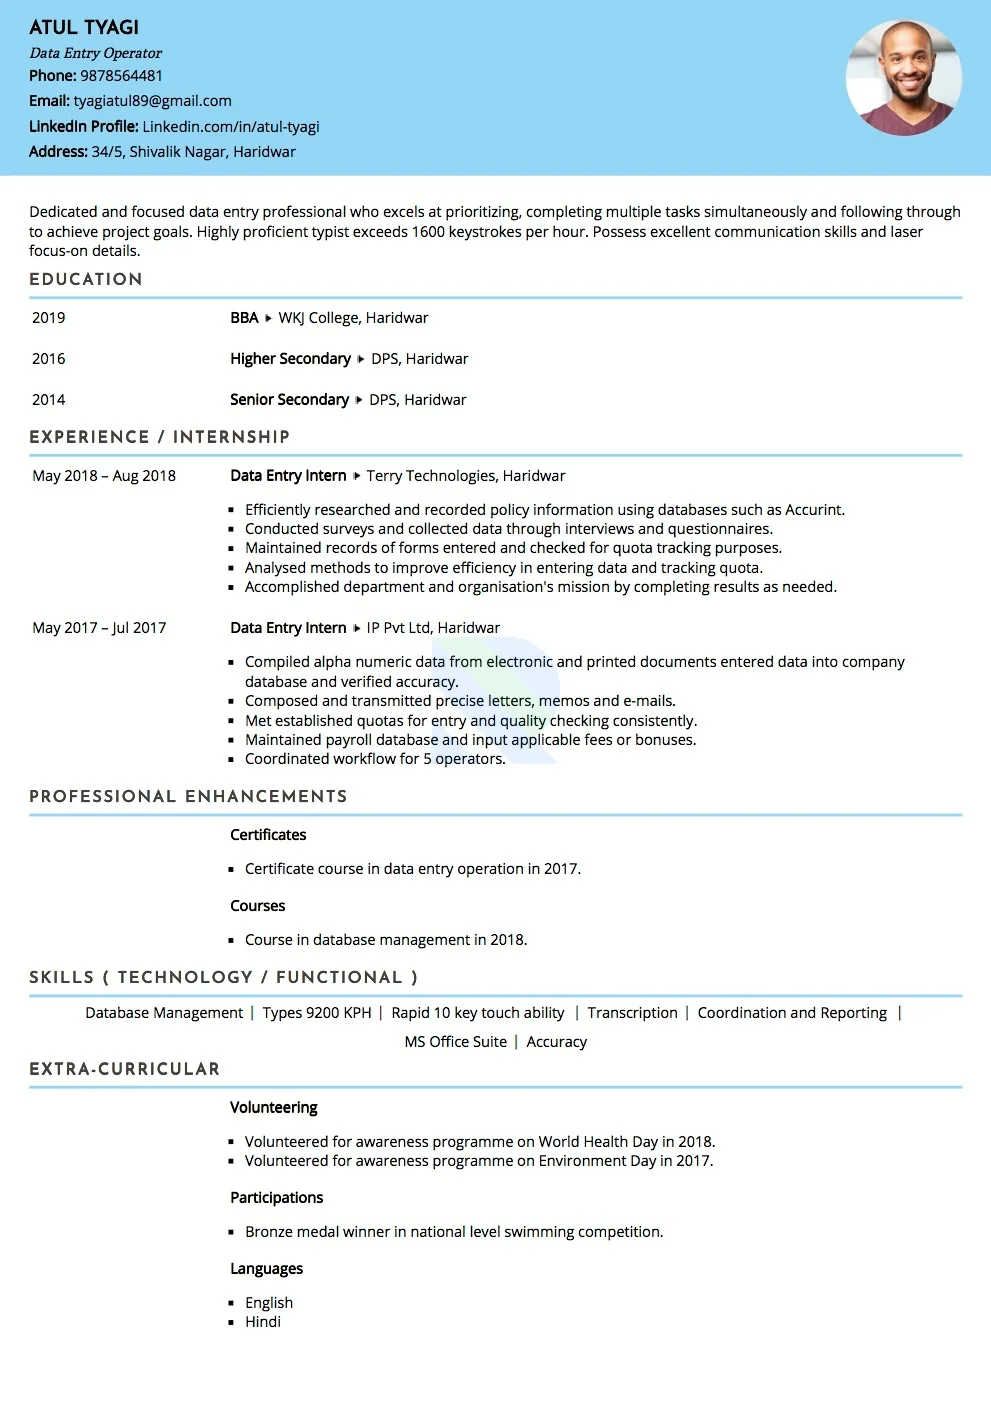 Sample Resume of Data Entry Operator  | Free Resume Templates & Samples on Resumod.co